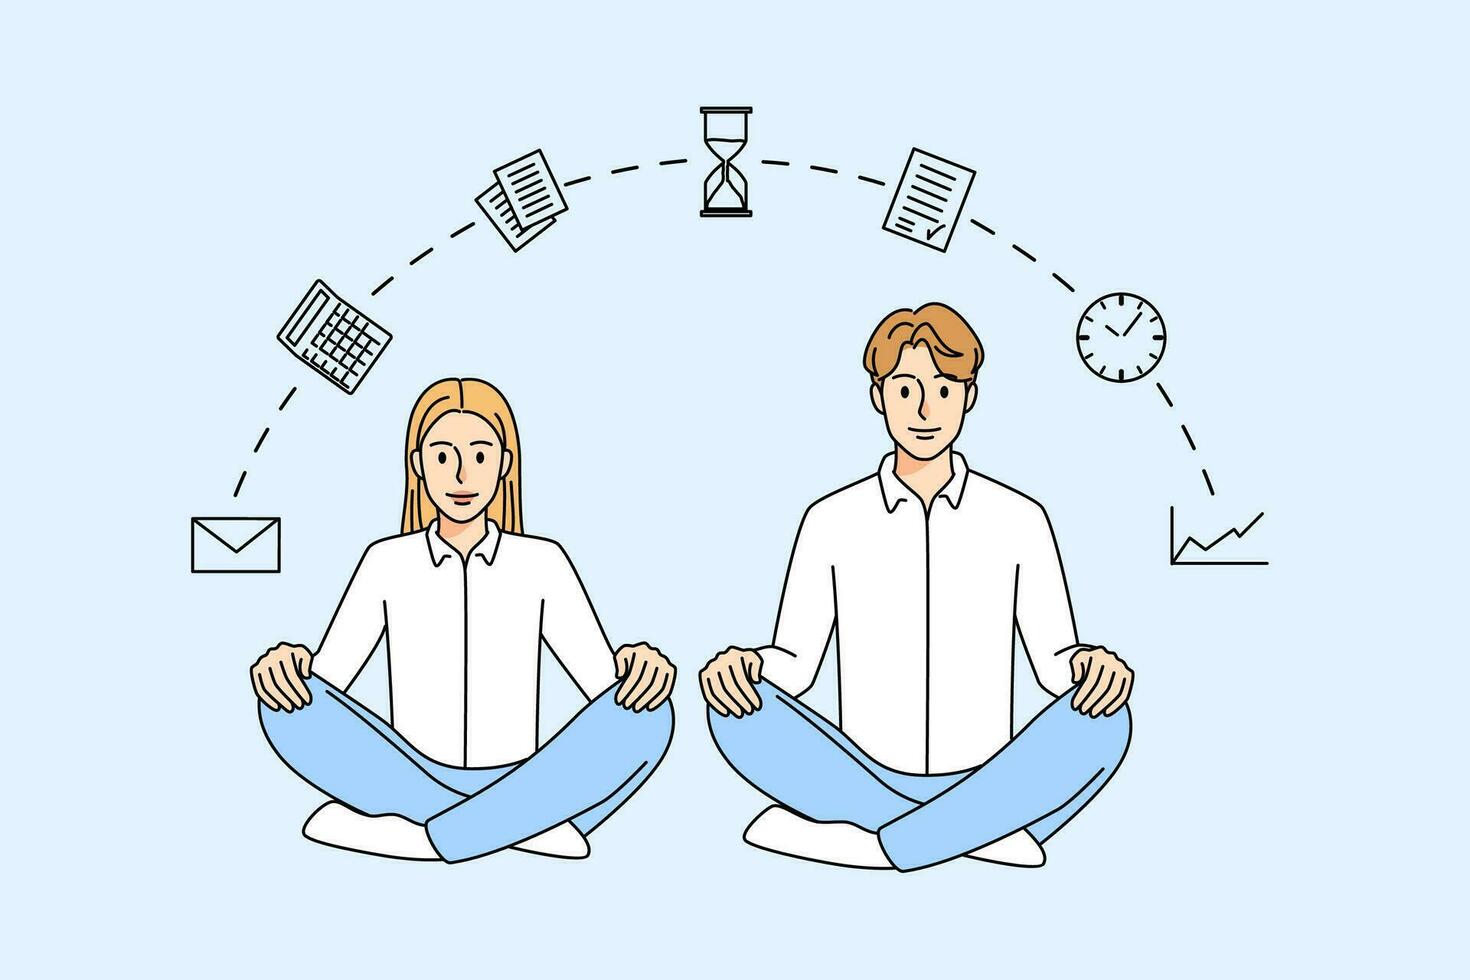 Businesspeople sit in lotus position meditating at workplace. Employees relax manage job duties and responsibilities. Time organization concept. Vector illustration.